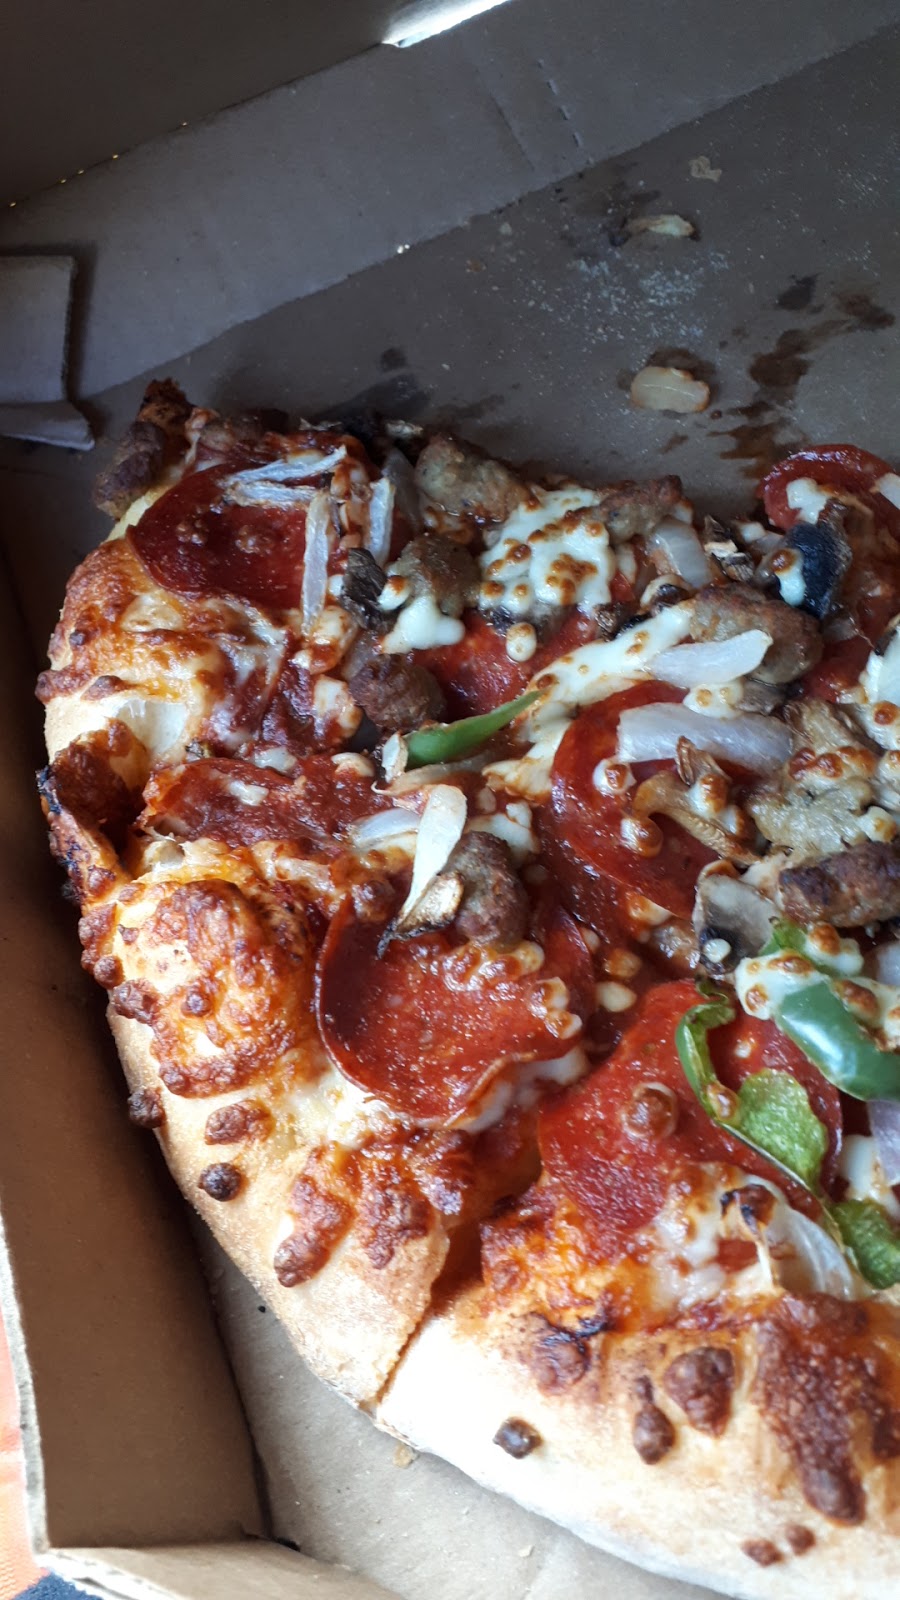 Dominos | 60 Charles St W Unit #5, Ingersoll, ON N5C 2L6, Canada | Phone: (519) 303-4000